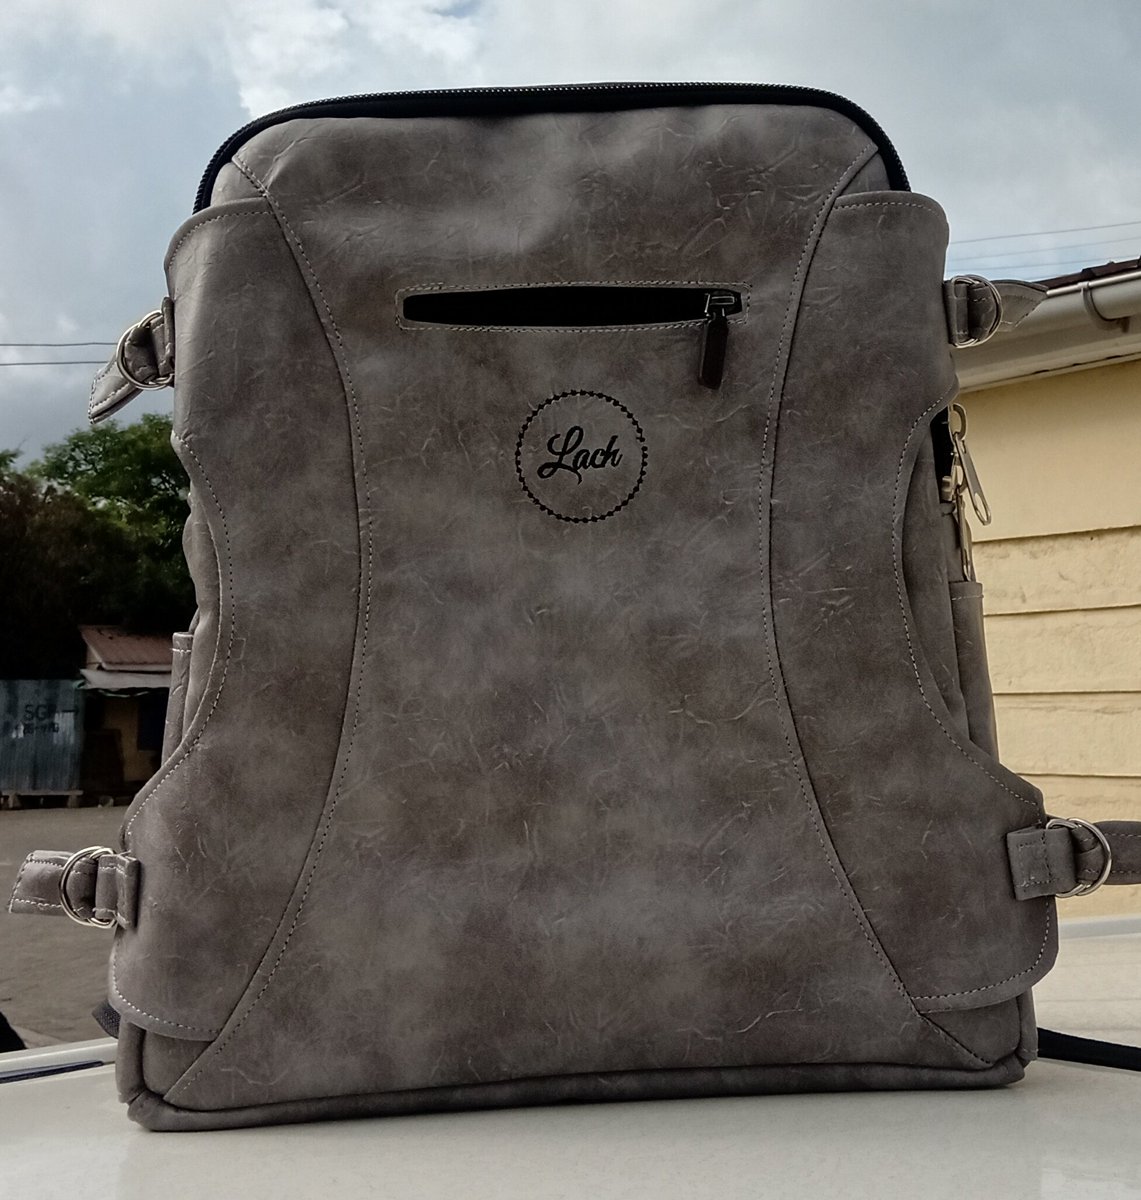 A reminder that we make all types of bags. We also customize. Frame 1. Ksh.1500 Frame 2. Ksh.2200 Frame 3. Ksh.3000 Frame 4. Ksh.2500 Call/Whatsapp 0703272757